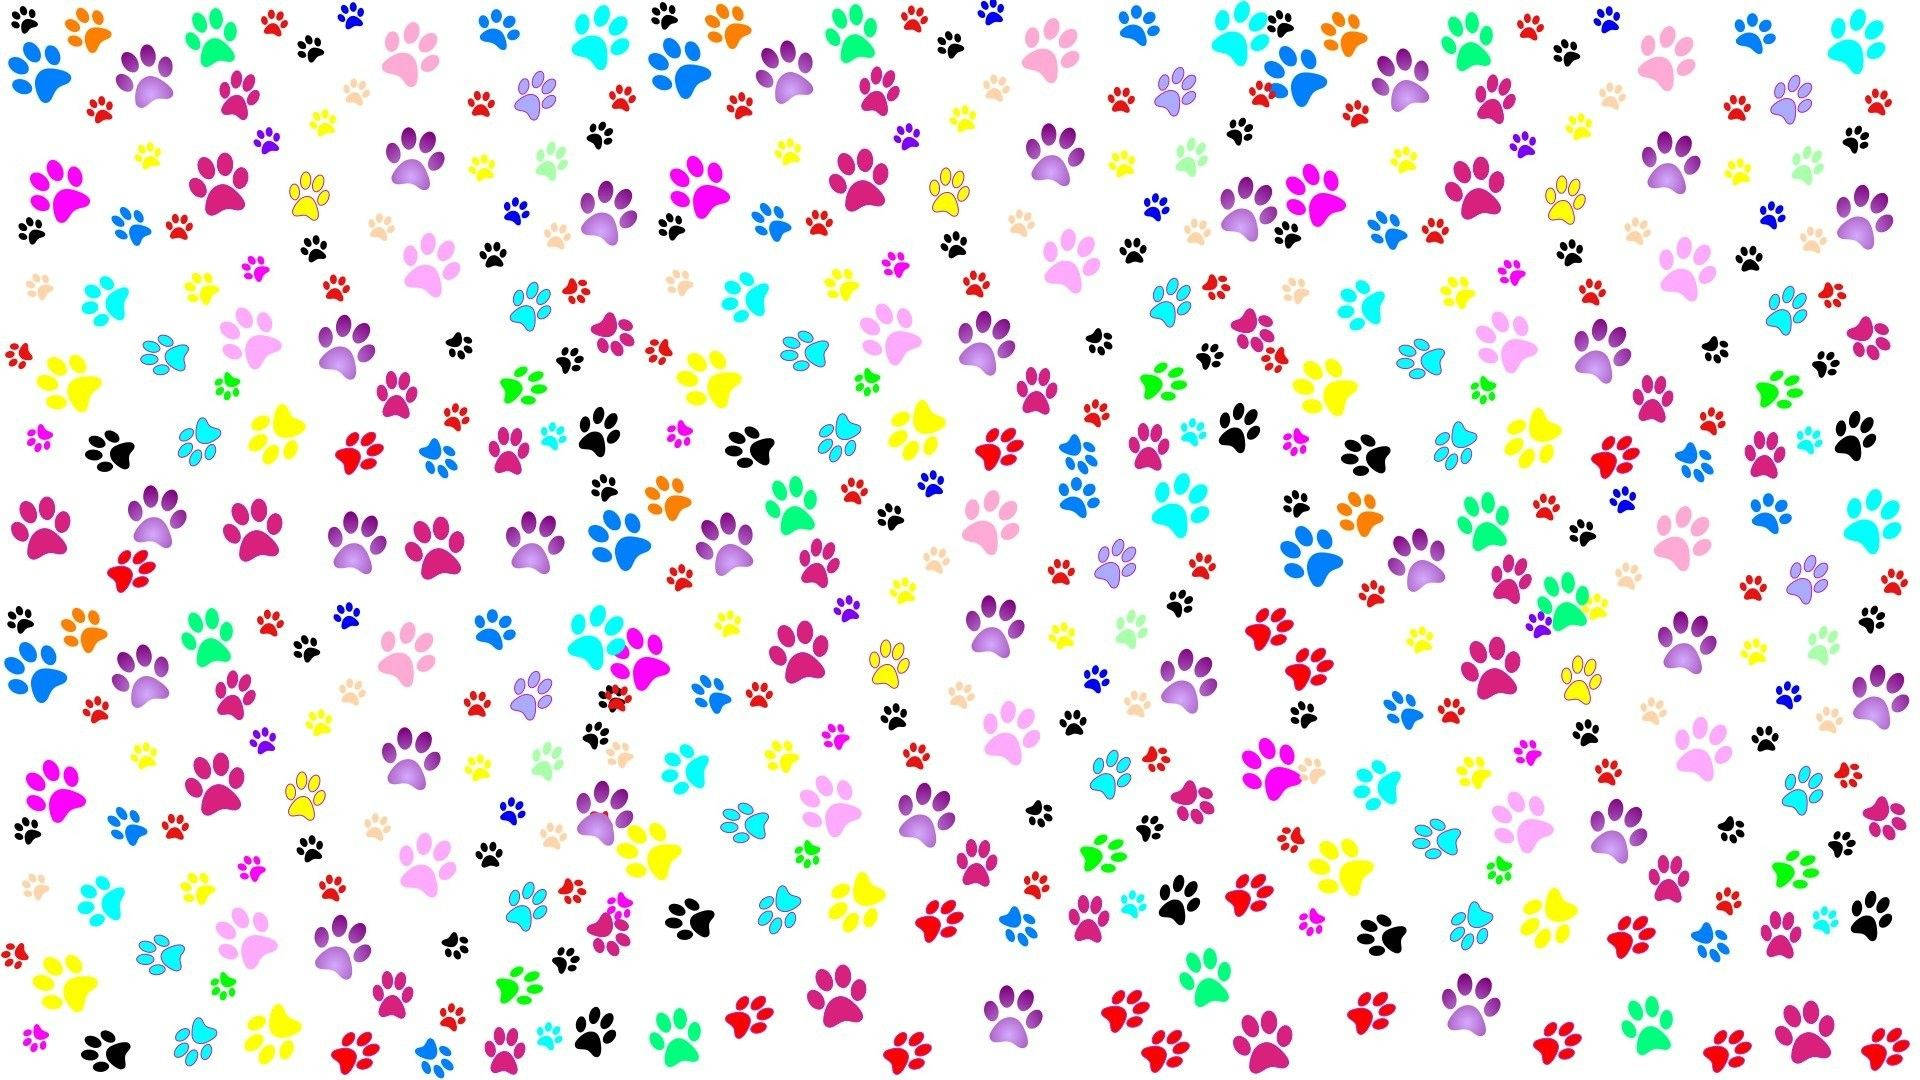 45 Paw Print Wallpapers & Backgrounds